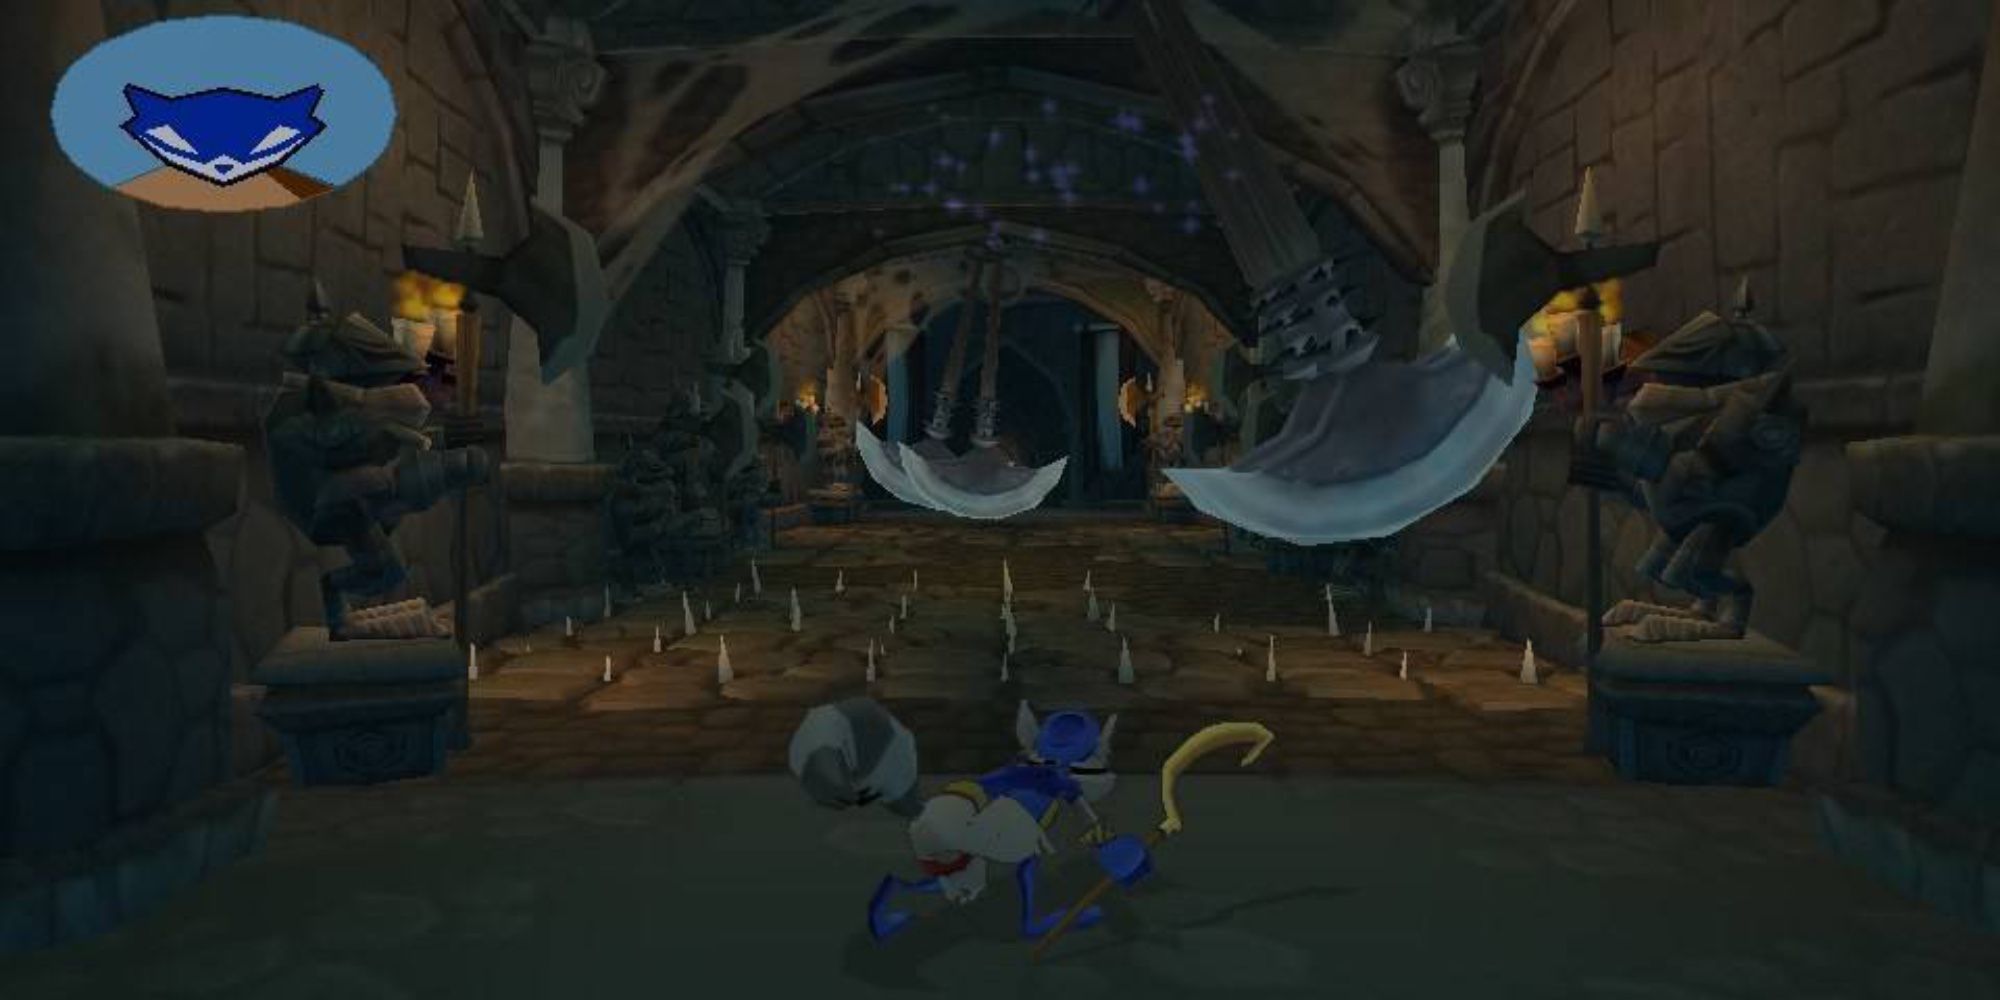 Sly Cooper facing swinging axe puzzle